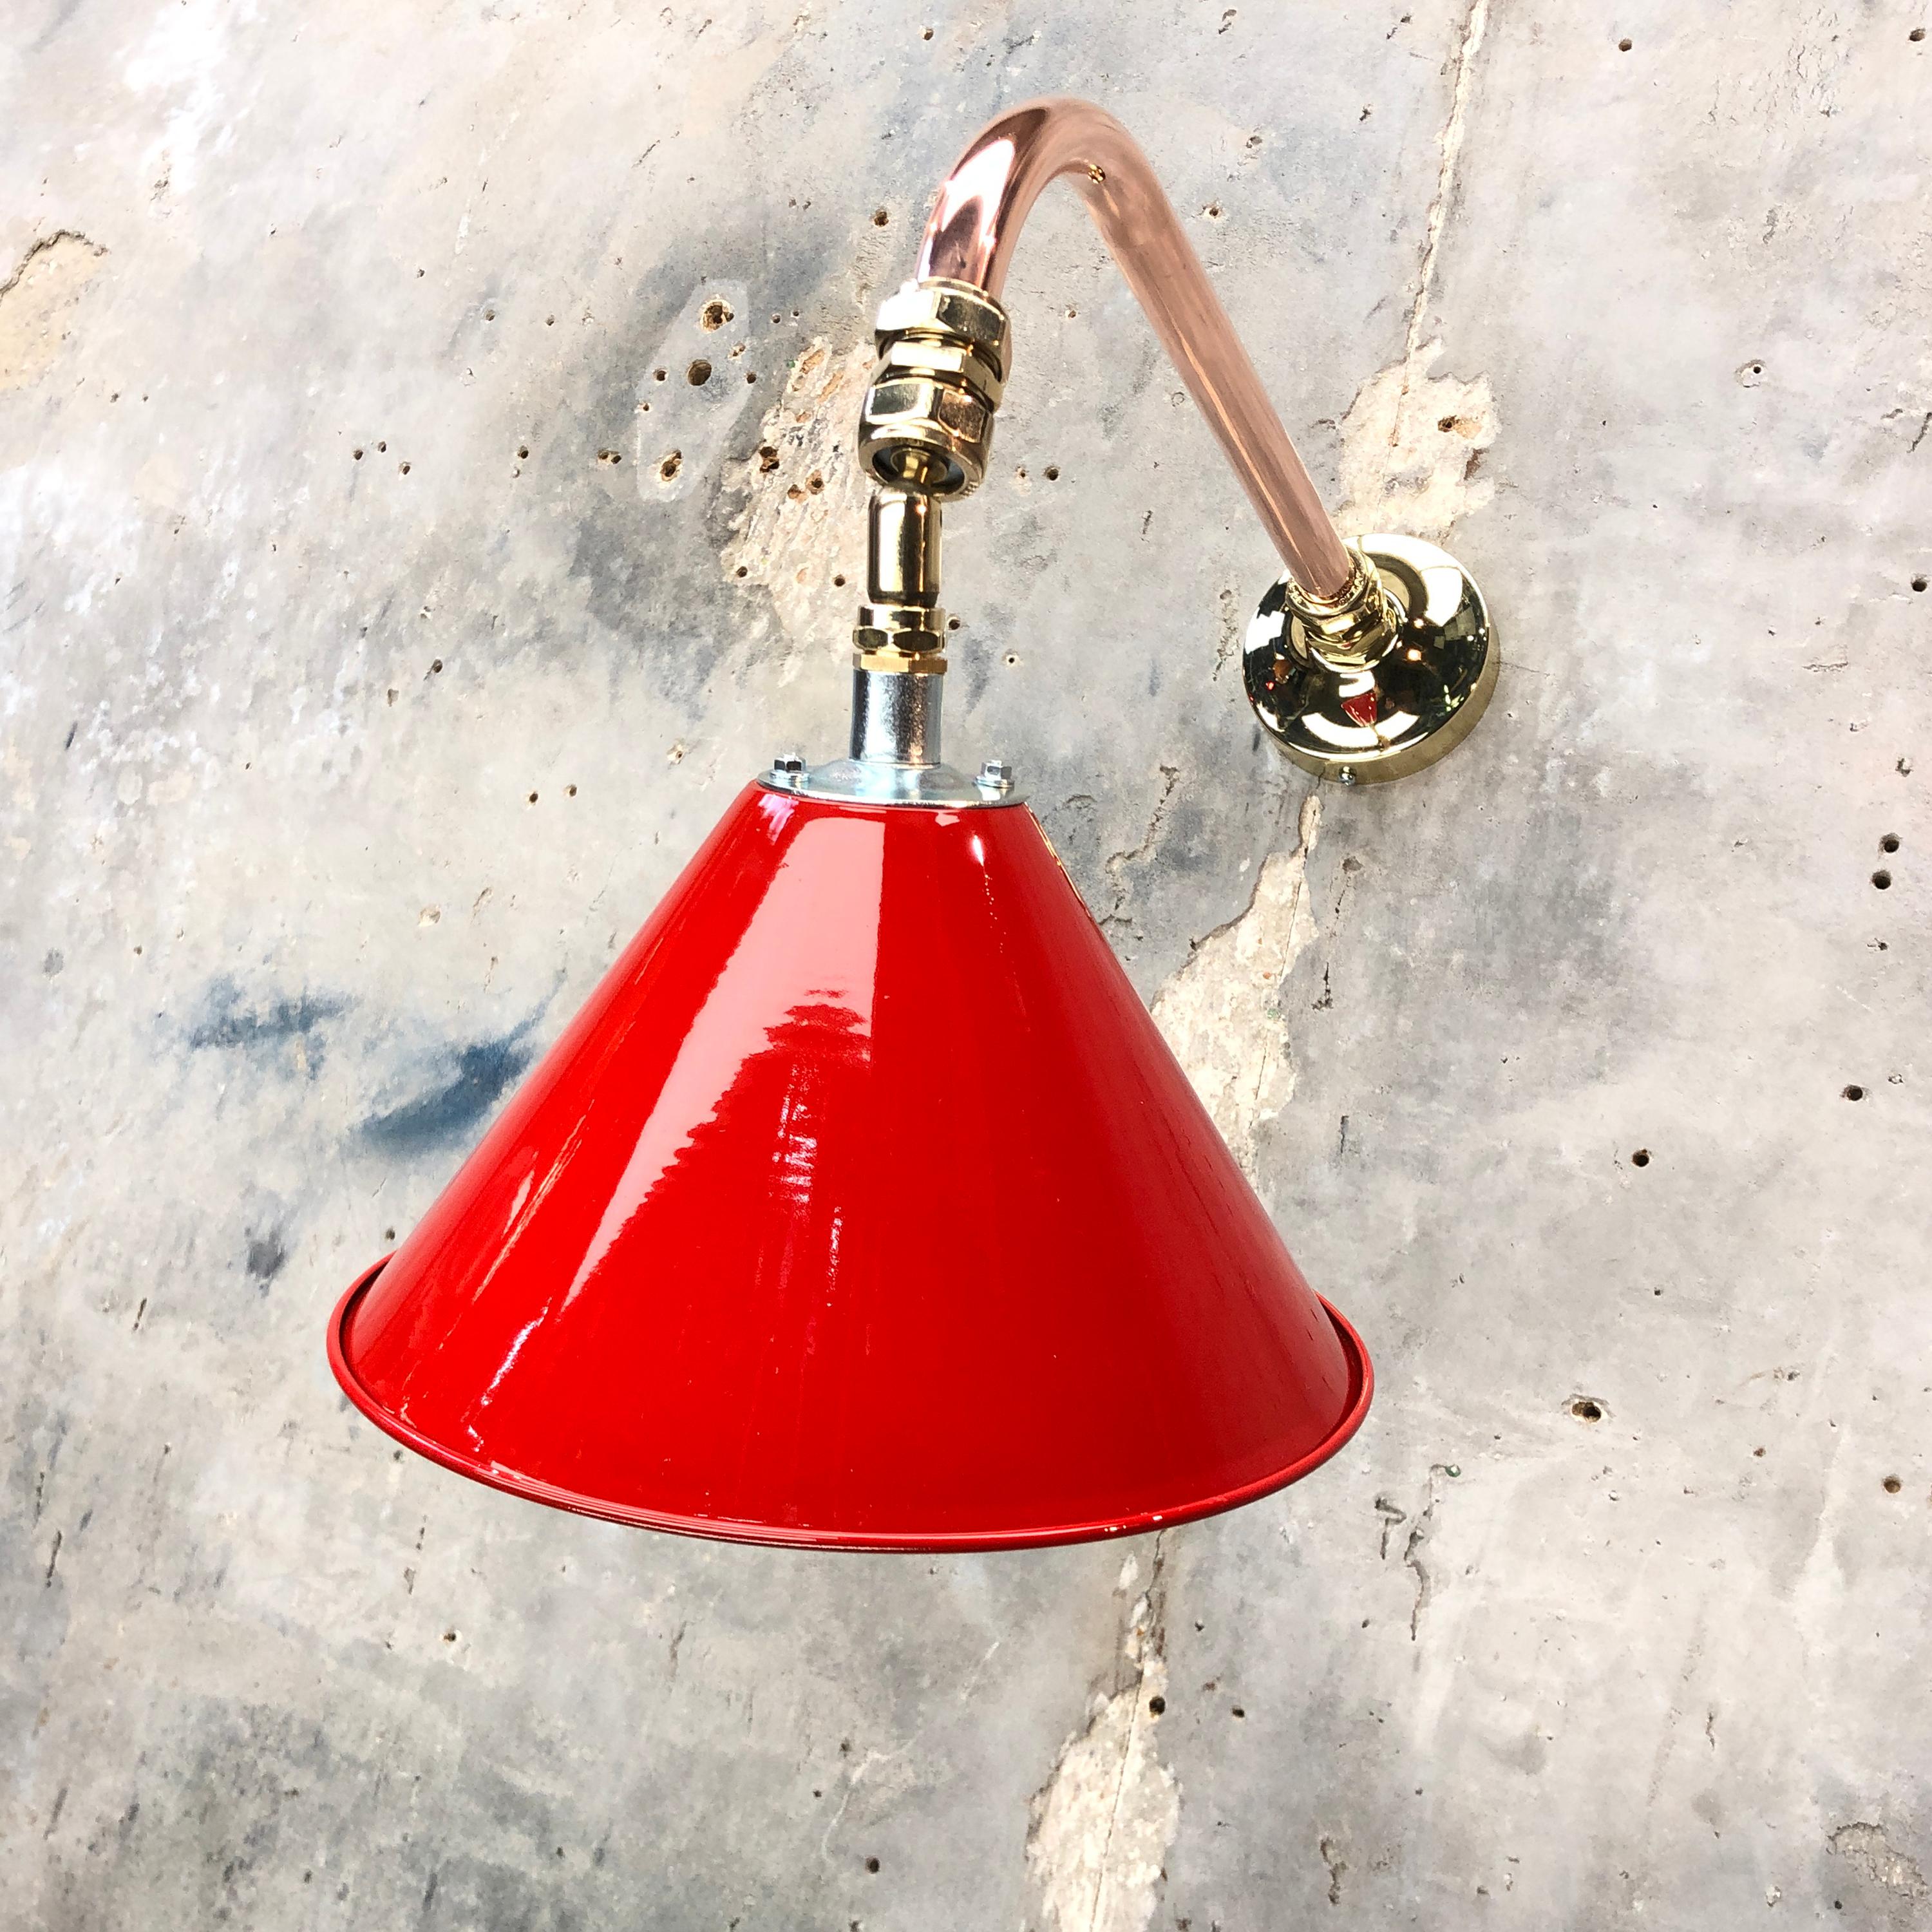 1980 British Army Lamp Shade in Red with Copper Cantilever Wall Lamp Edison Bulb For Sale 4